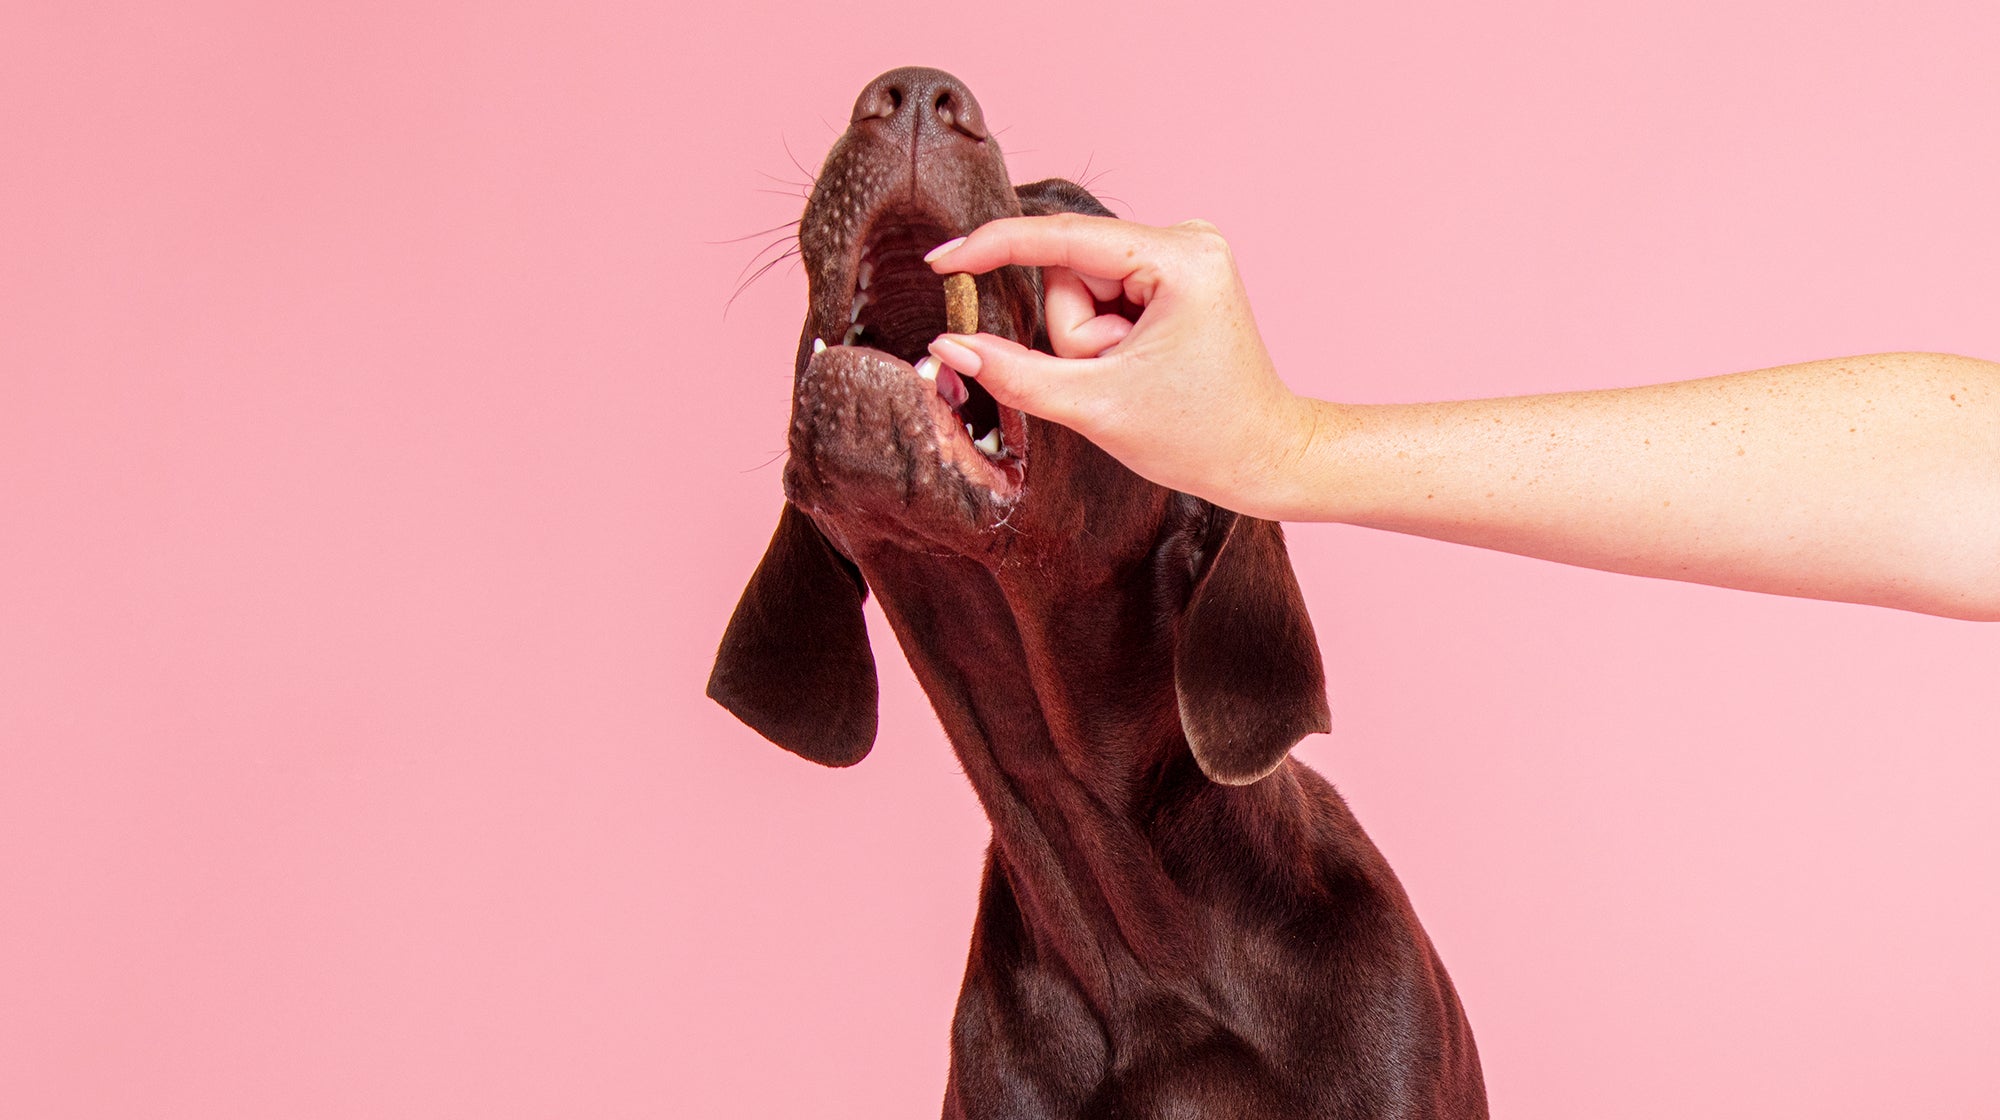 A chocolate Labrador taking a treat from their owner, against a pale pink background